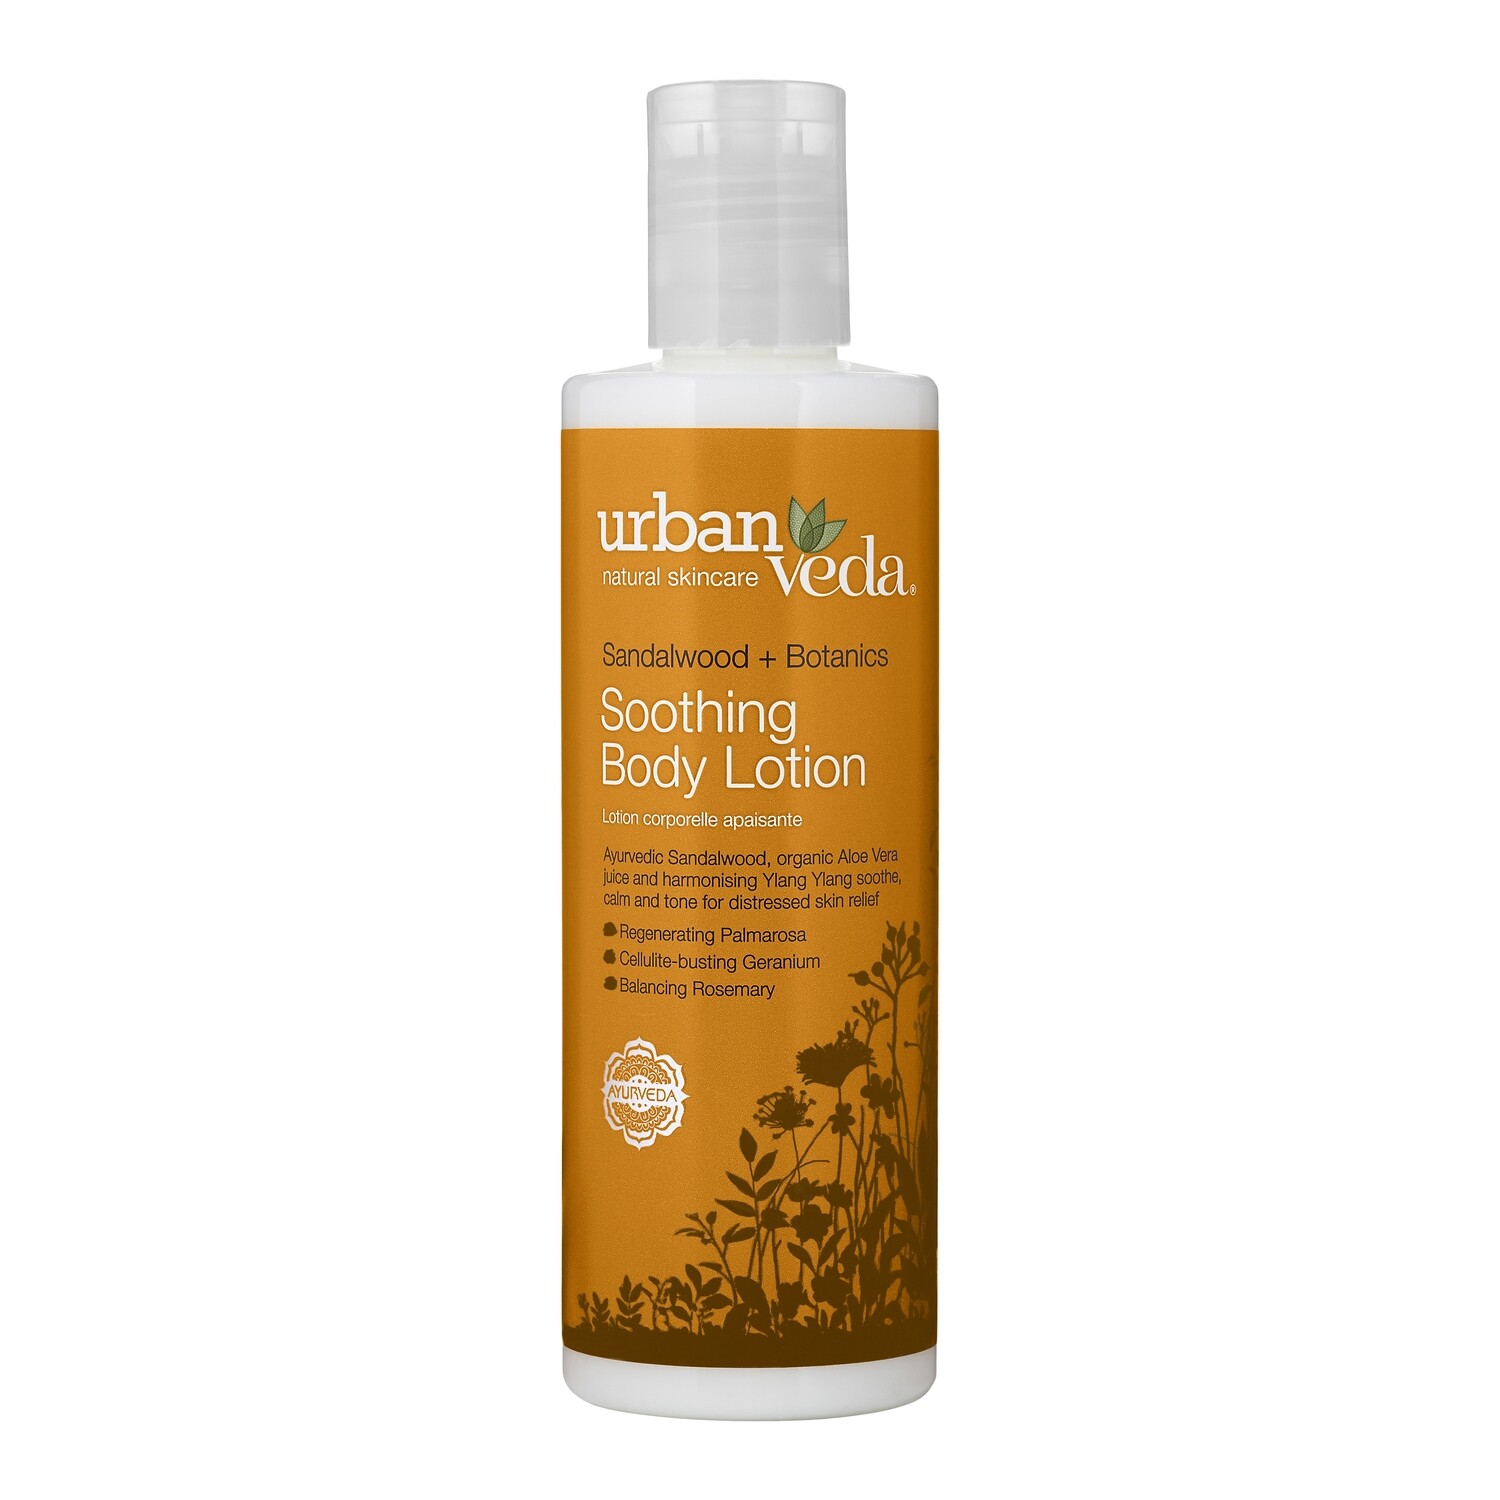 Soothing Body Lotion